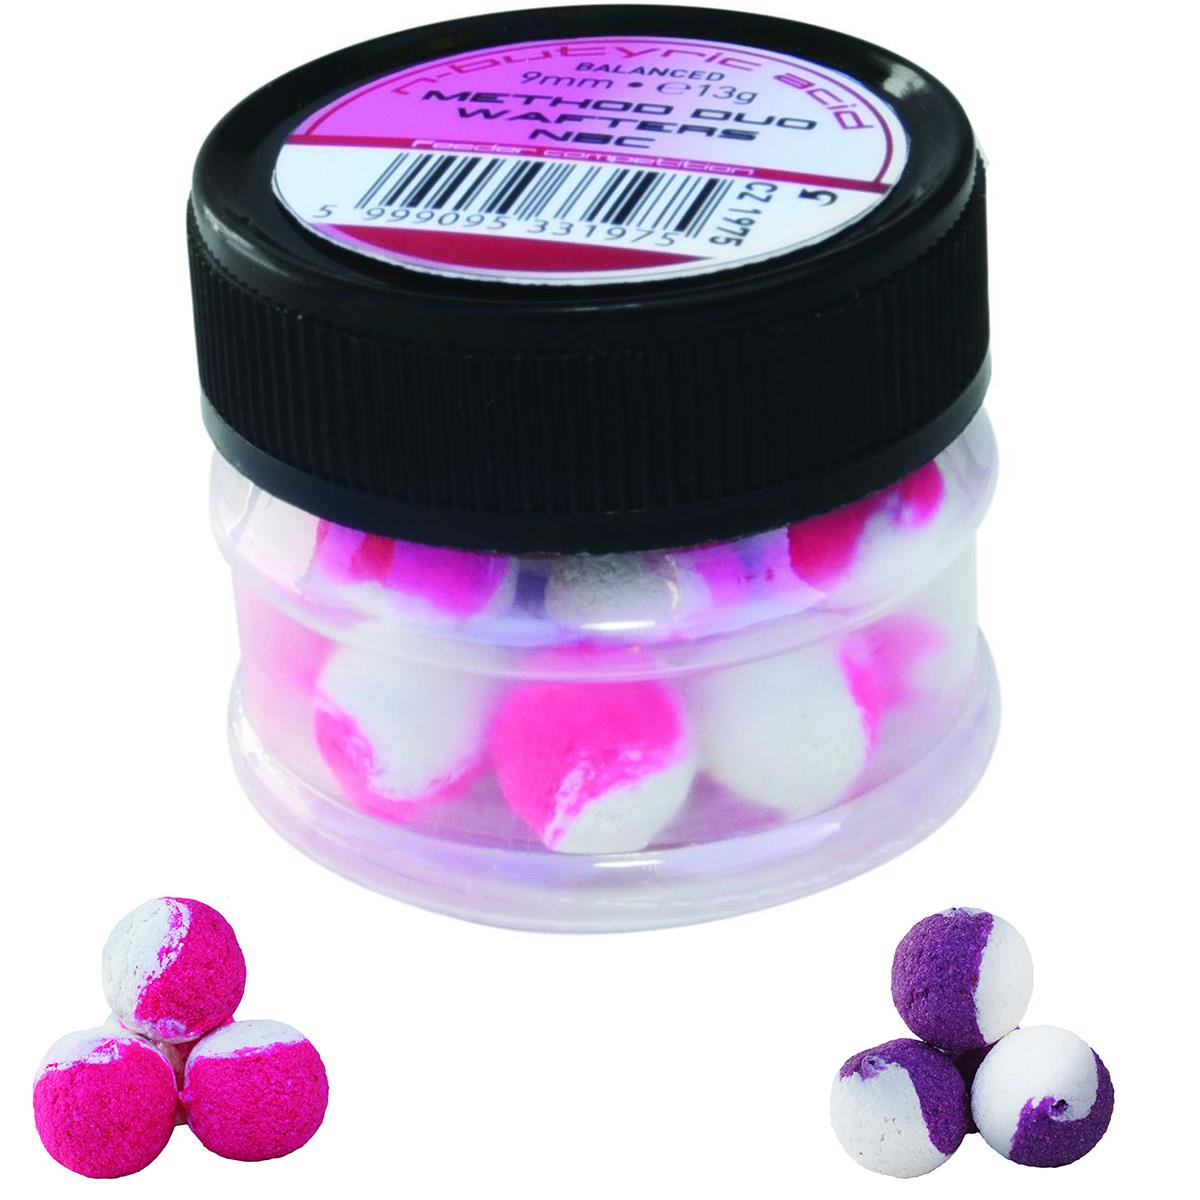 WAFTERS FC METHOD FEEDER NBC DUO 11mm 13gr Purple-White